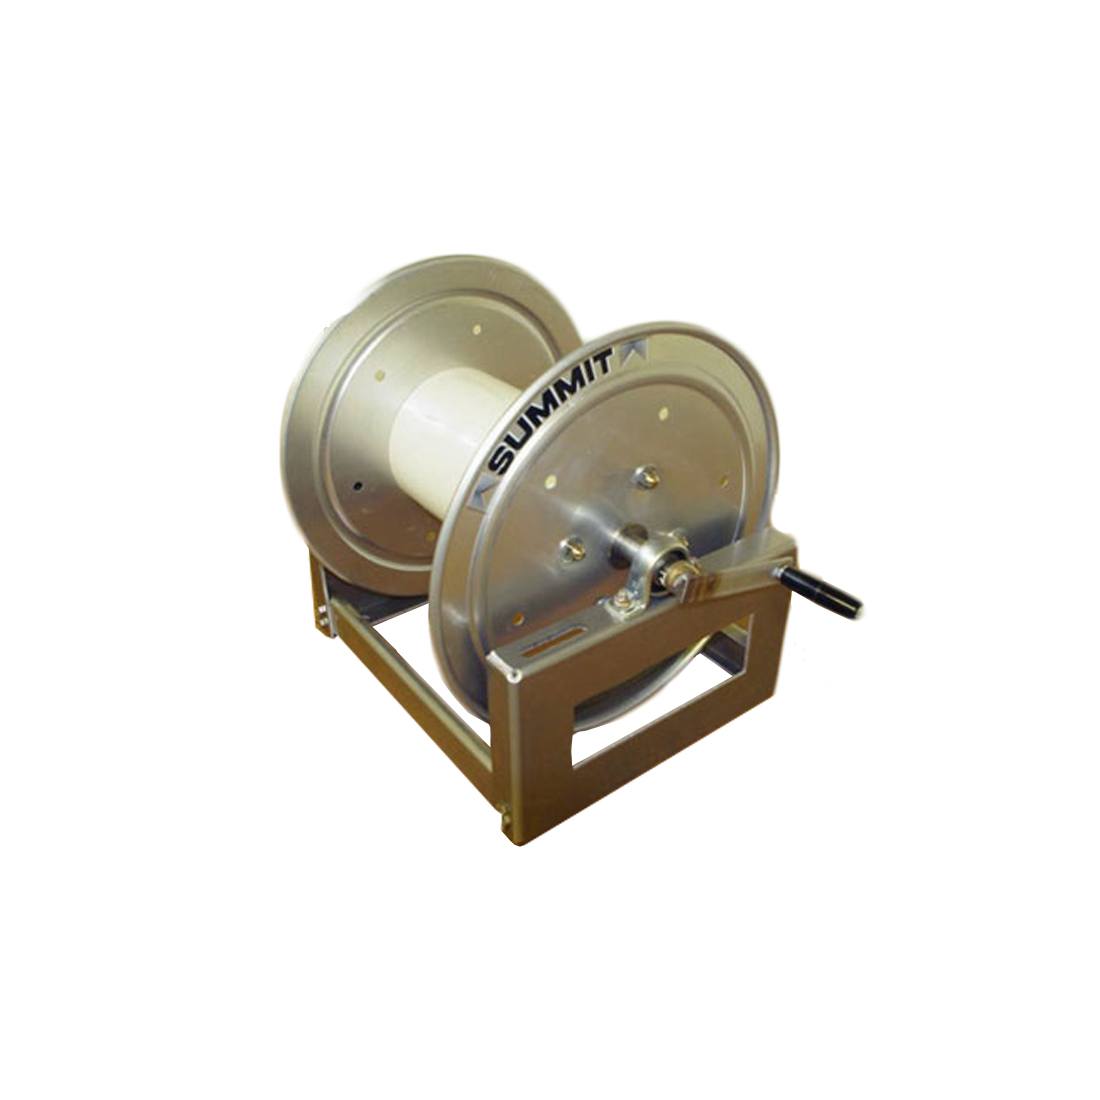 Summit SM Series - Aluminum Hose Reel with 1/2 Inch Inlet - SMA12 - Left Oblique View